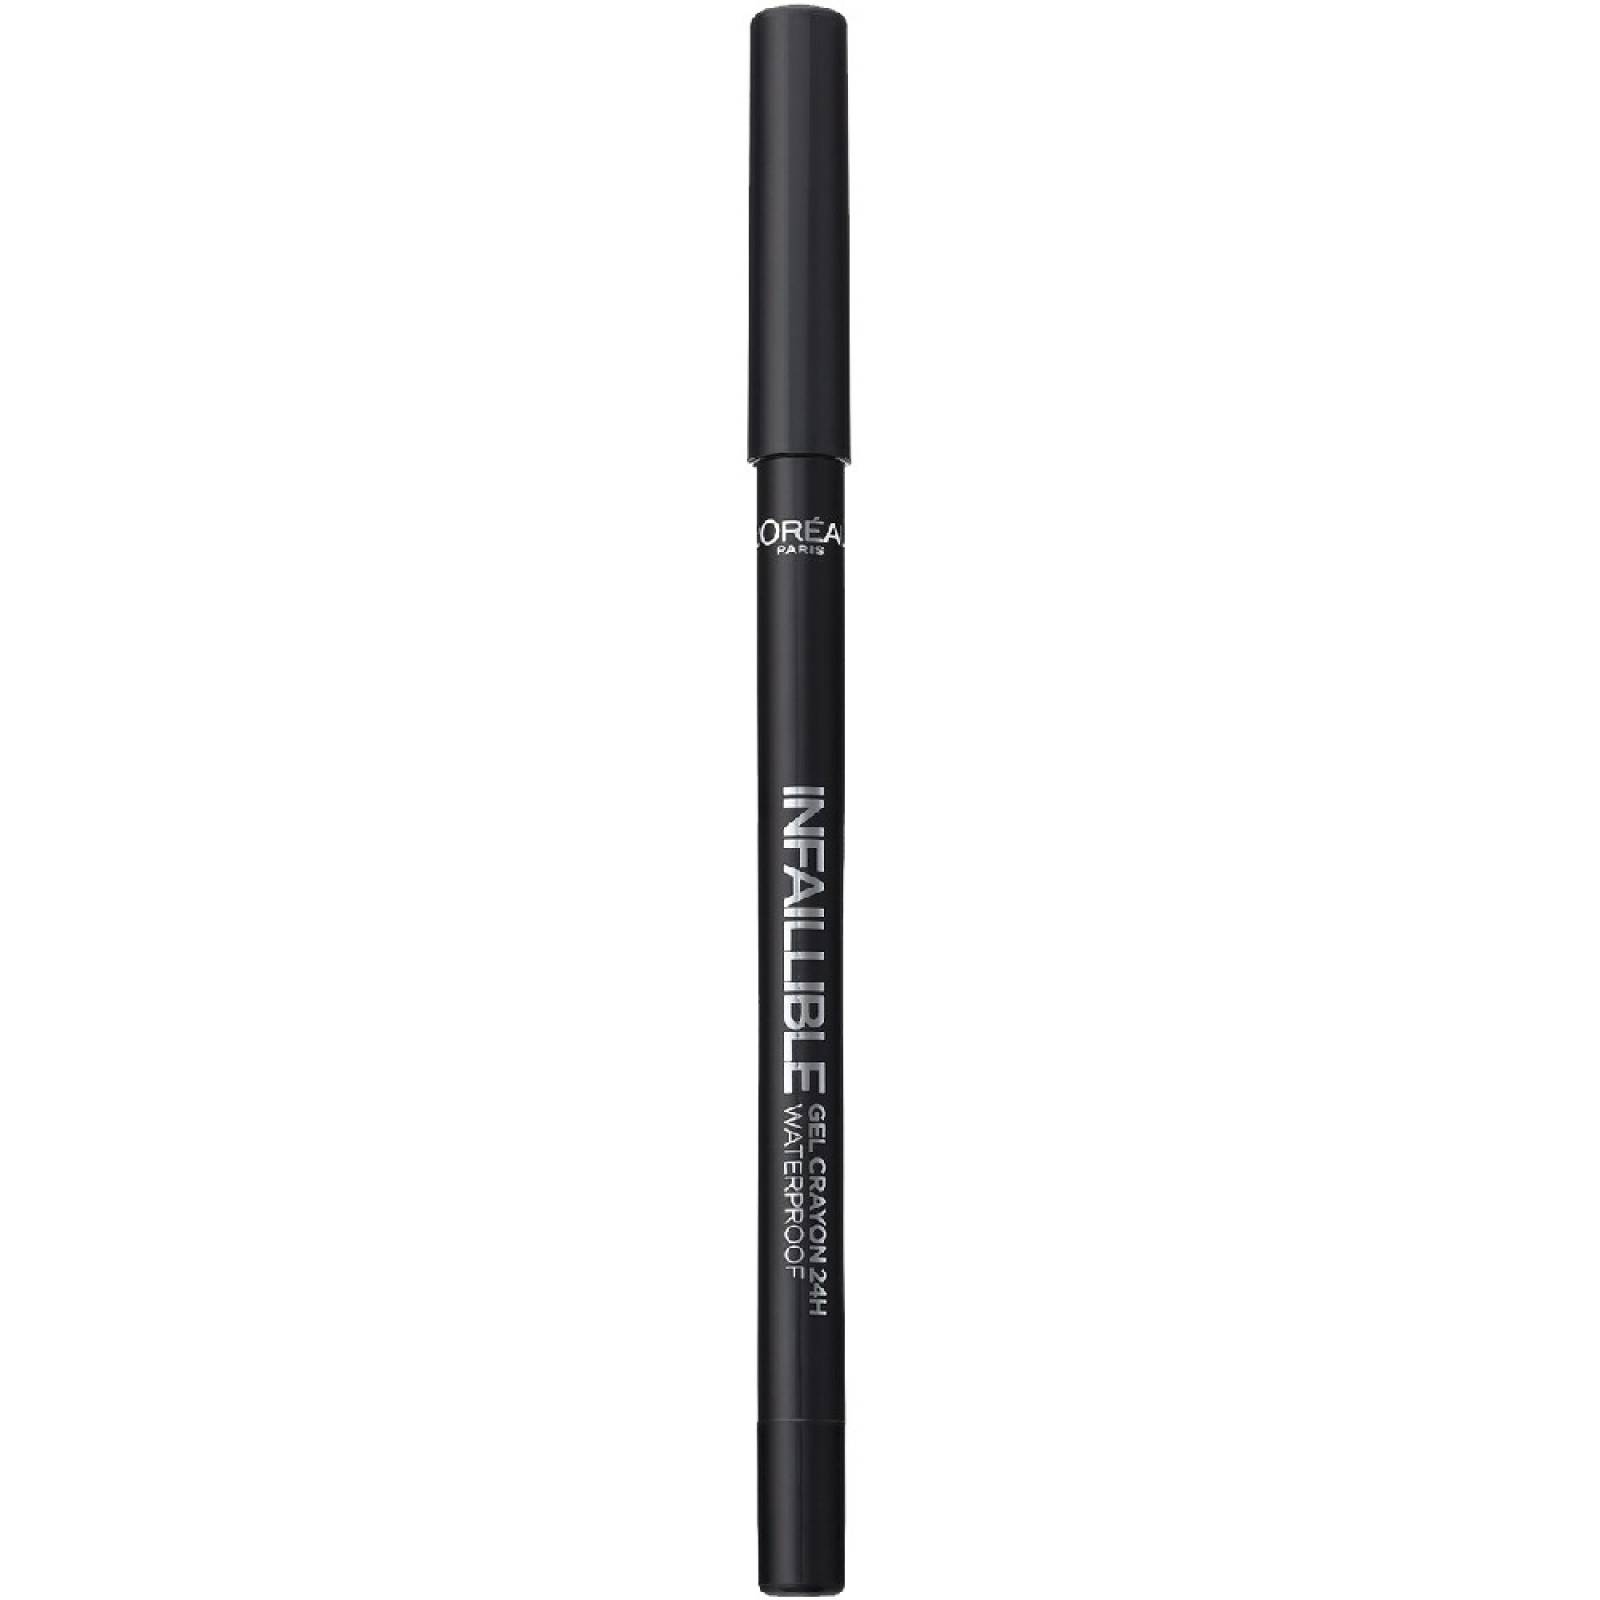 Delineador Ojos Loreal Infallible Paint Black to black 01